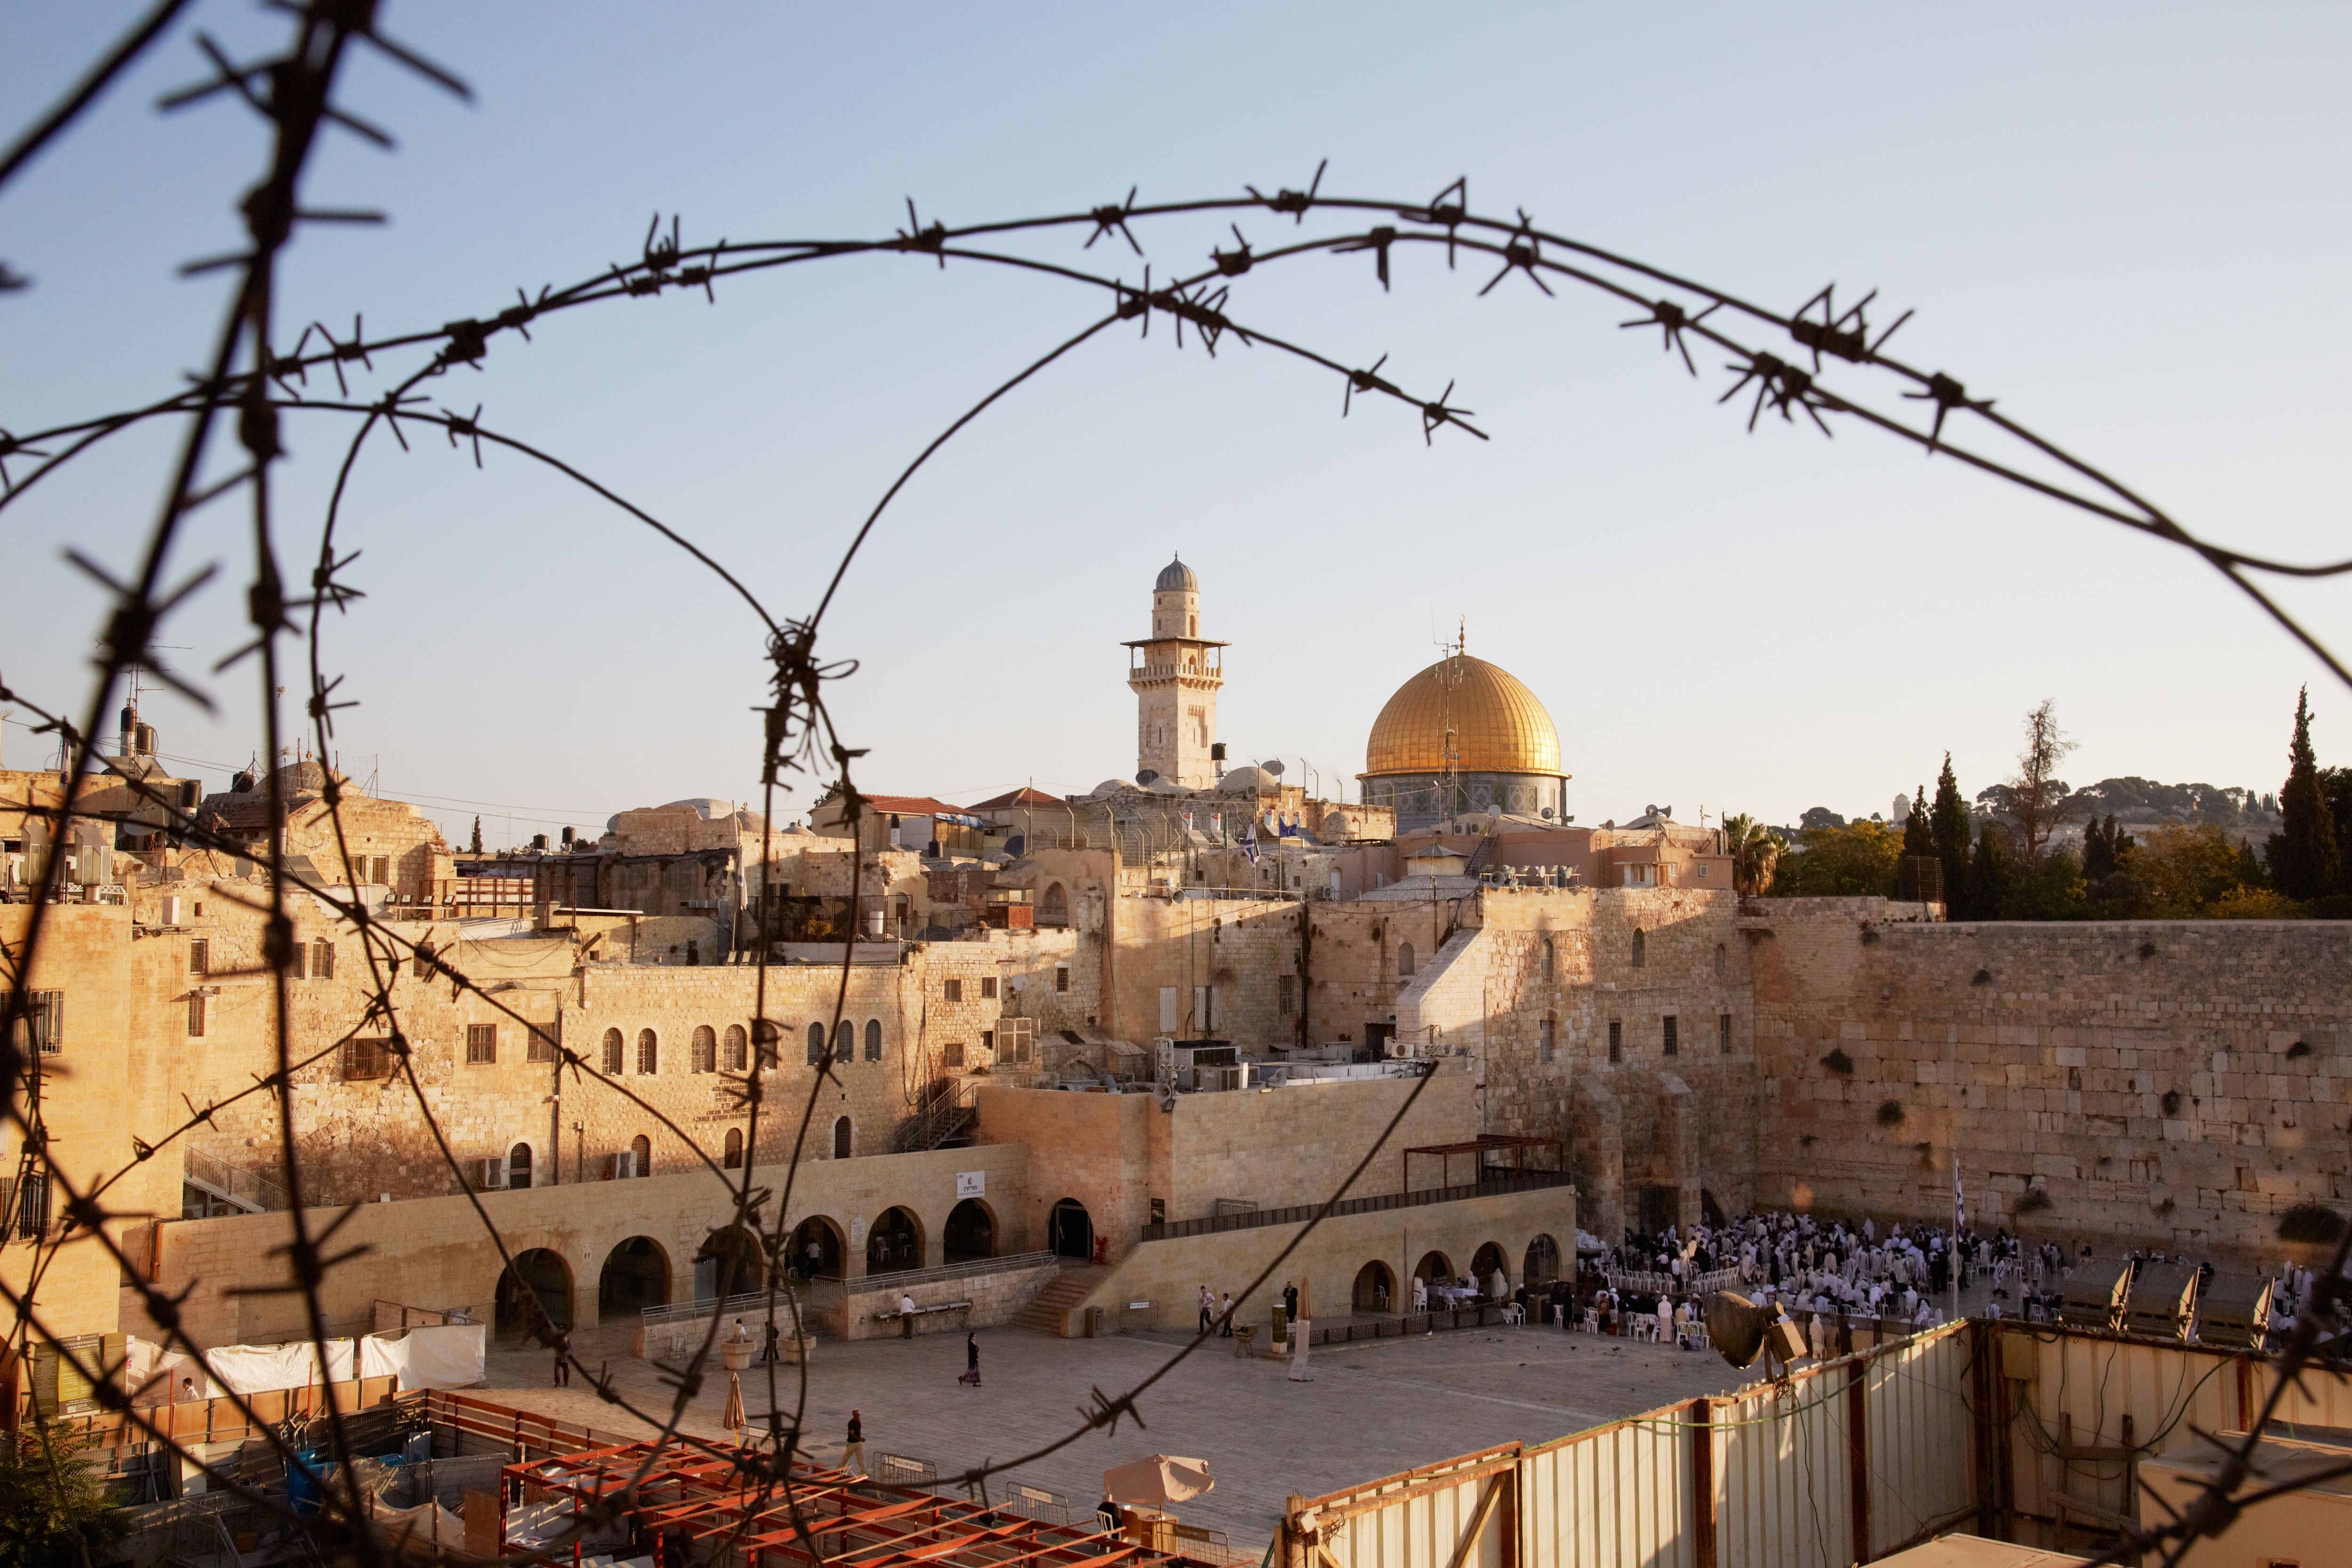 Palestine, HISTORY , Religion & Conflicts